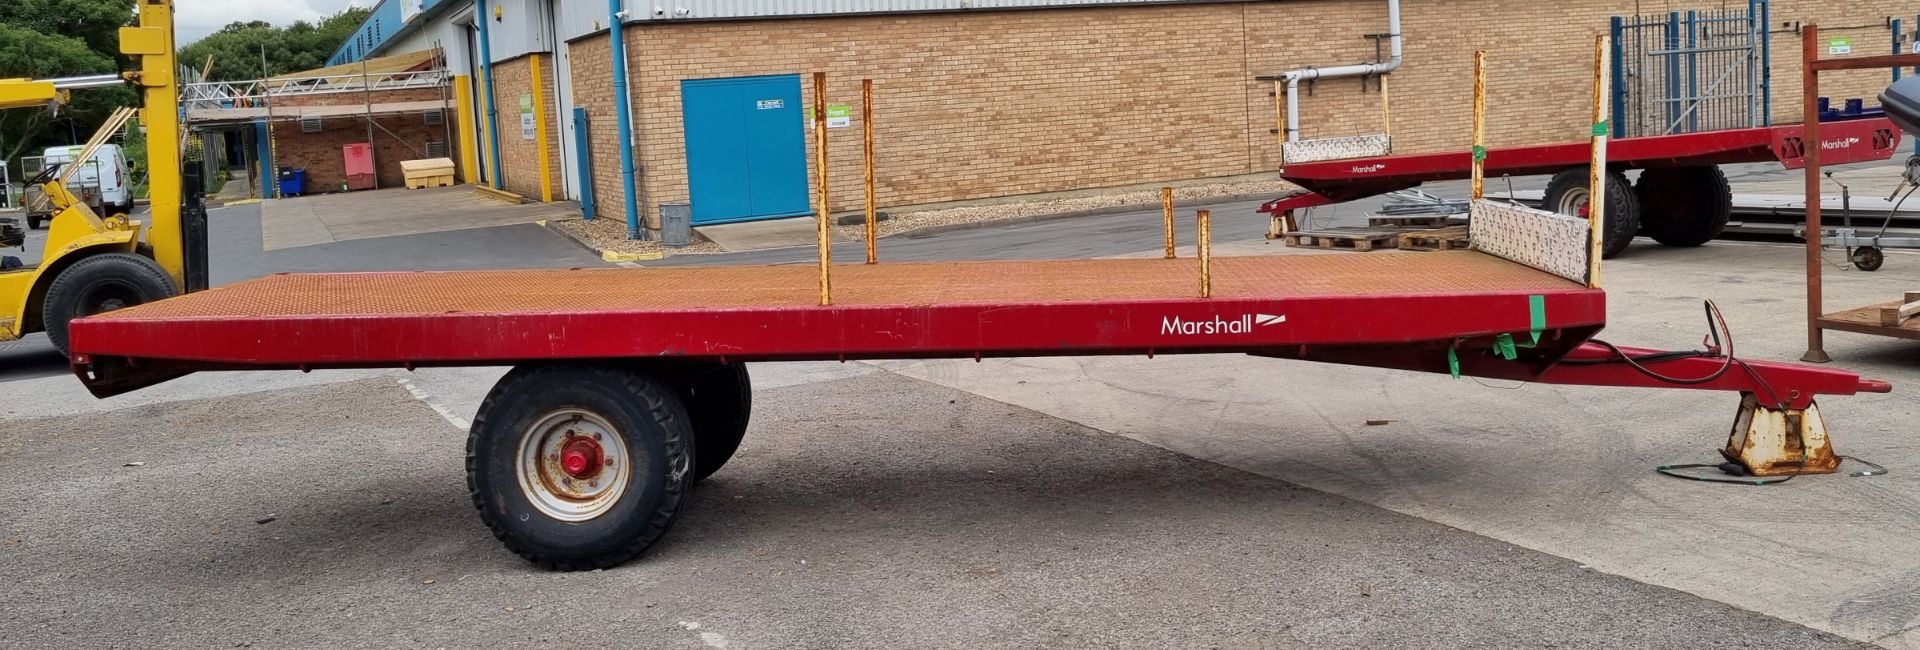 Marshall BC18N 2019 single axle flatbed trailer - 5000 kg carrying capacity - 40kph max design speed - Image 5 of 9